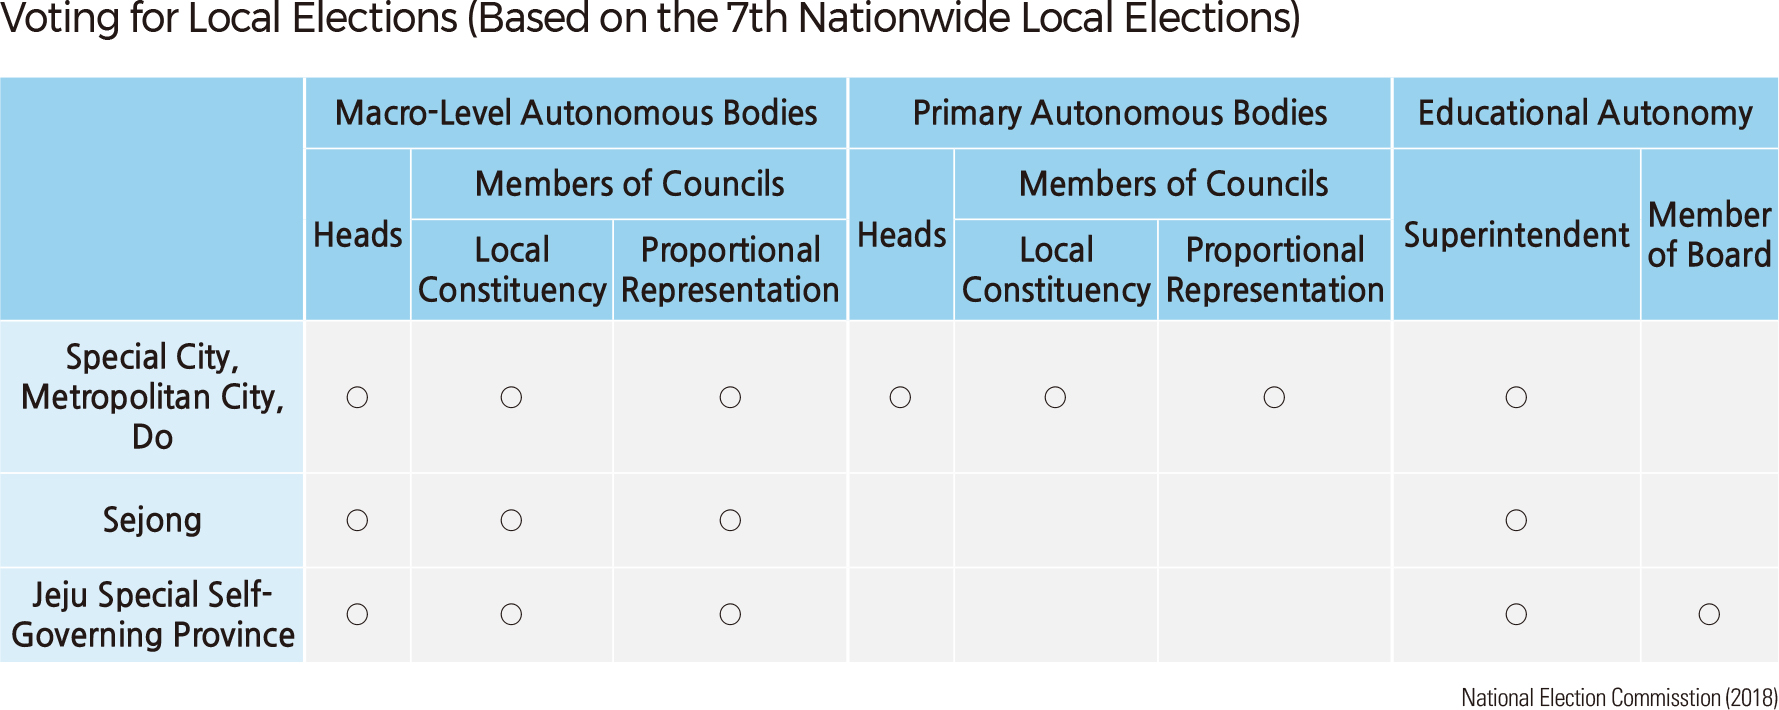 Voting for Local Elections (Based on the 7th Nationwide Local Elections)